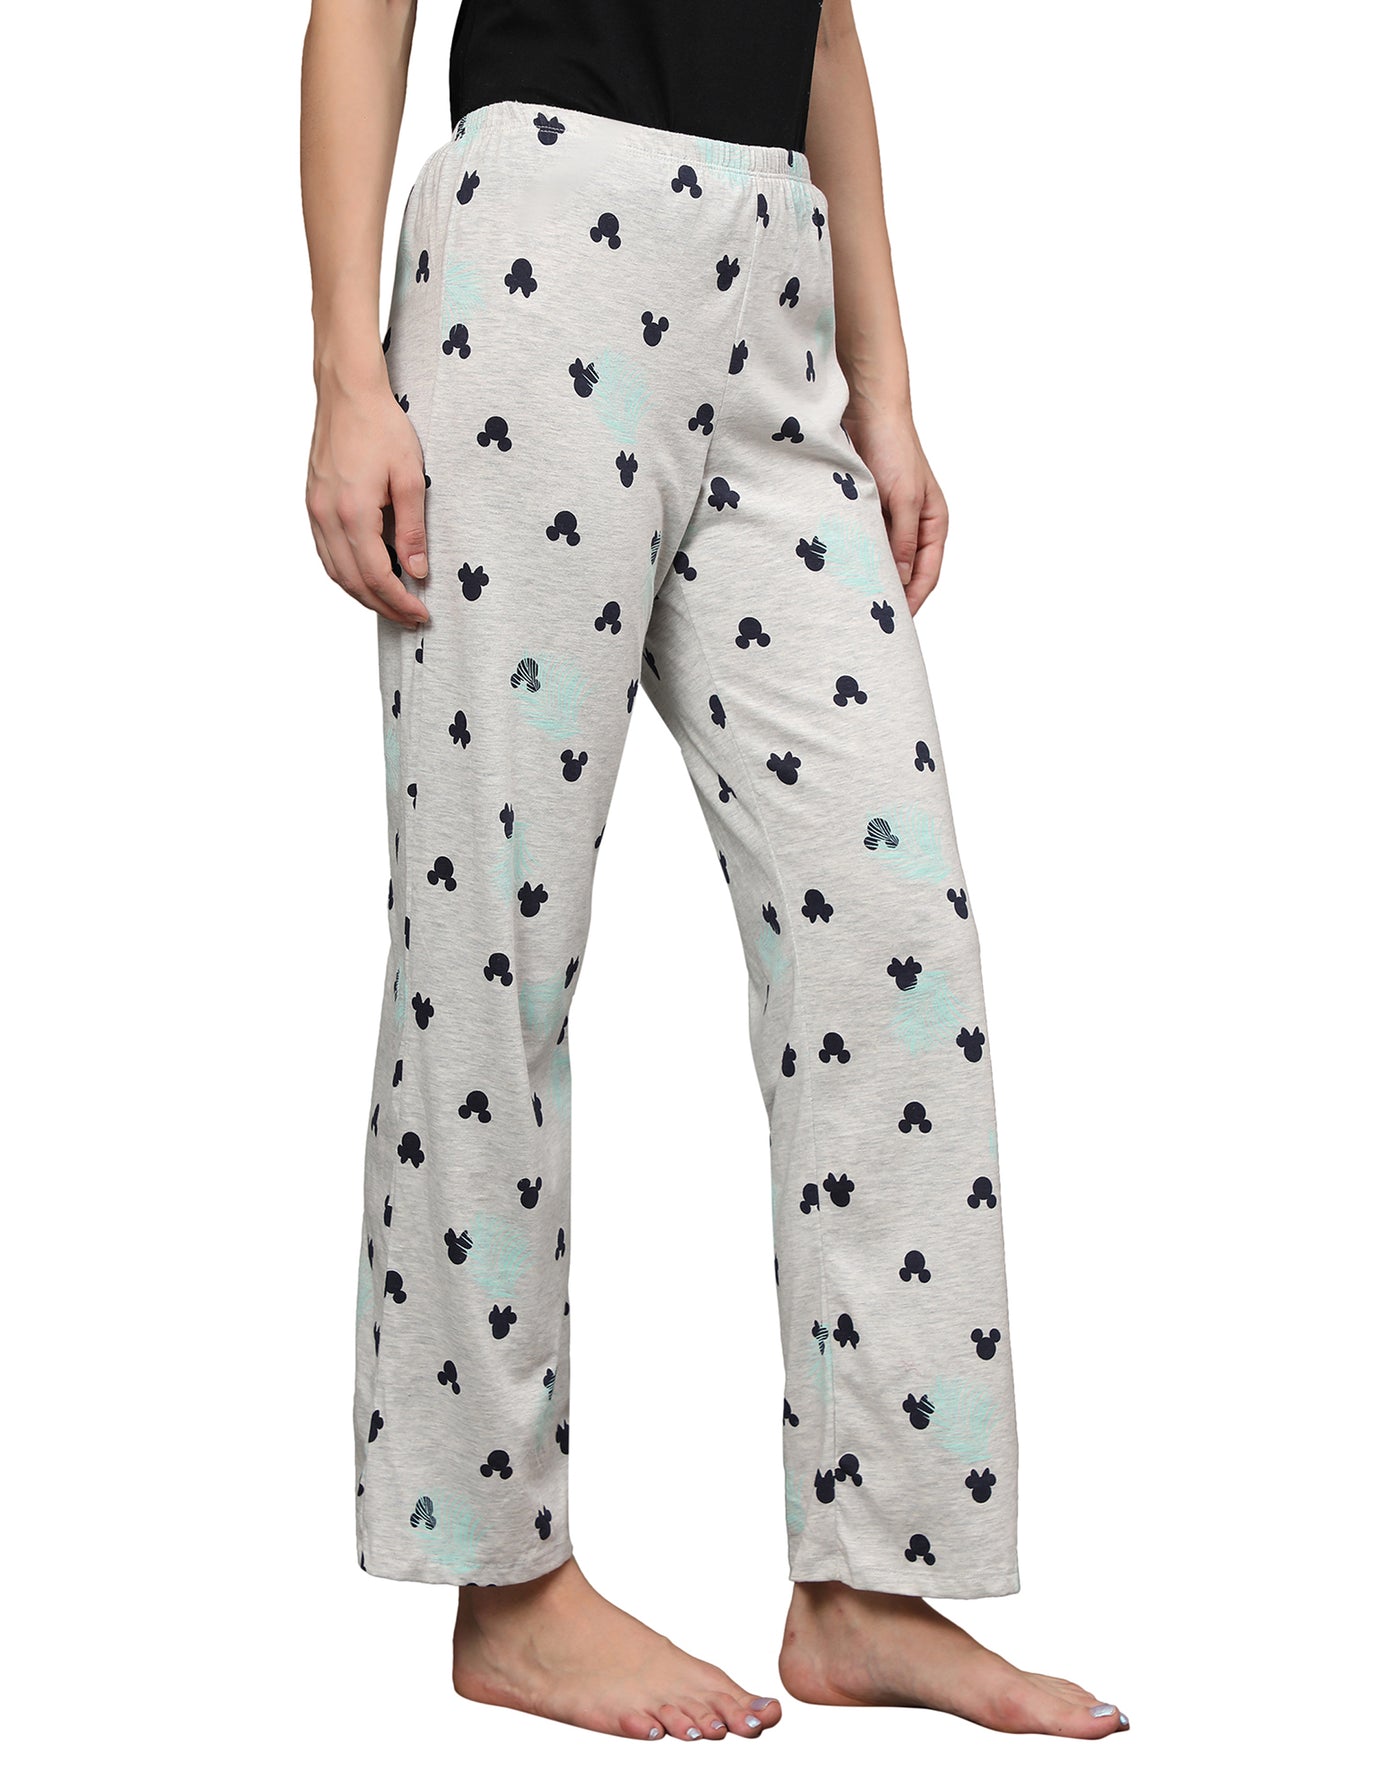 Lounge Pant for Women-Grey Mickey Mouse